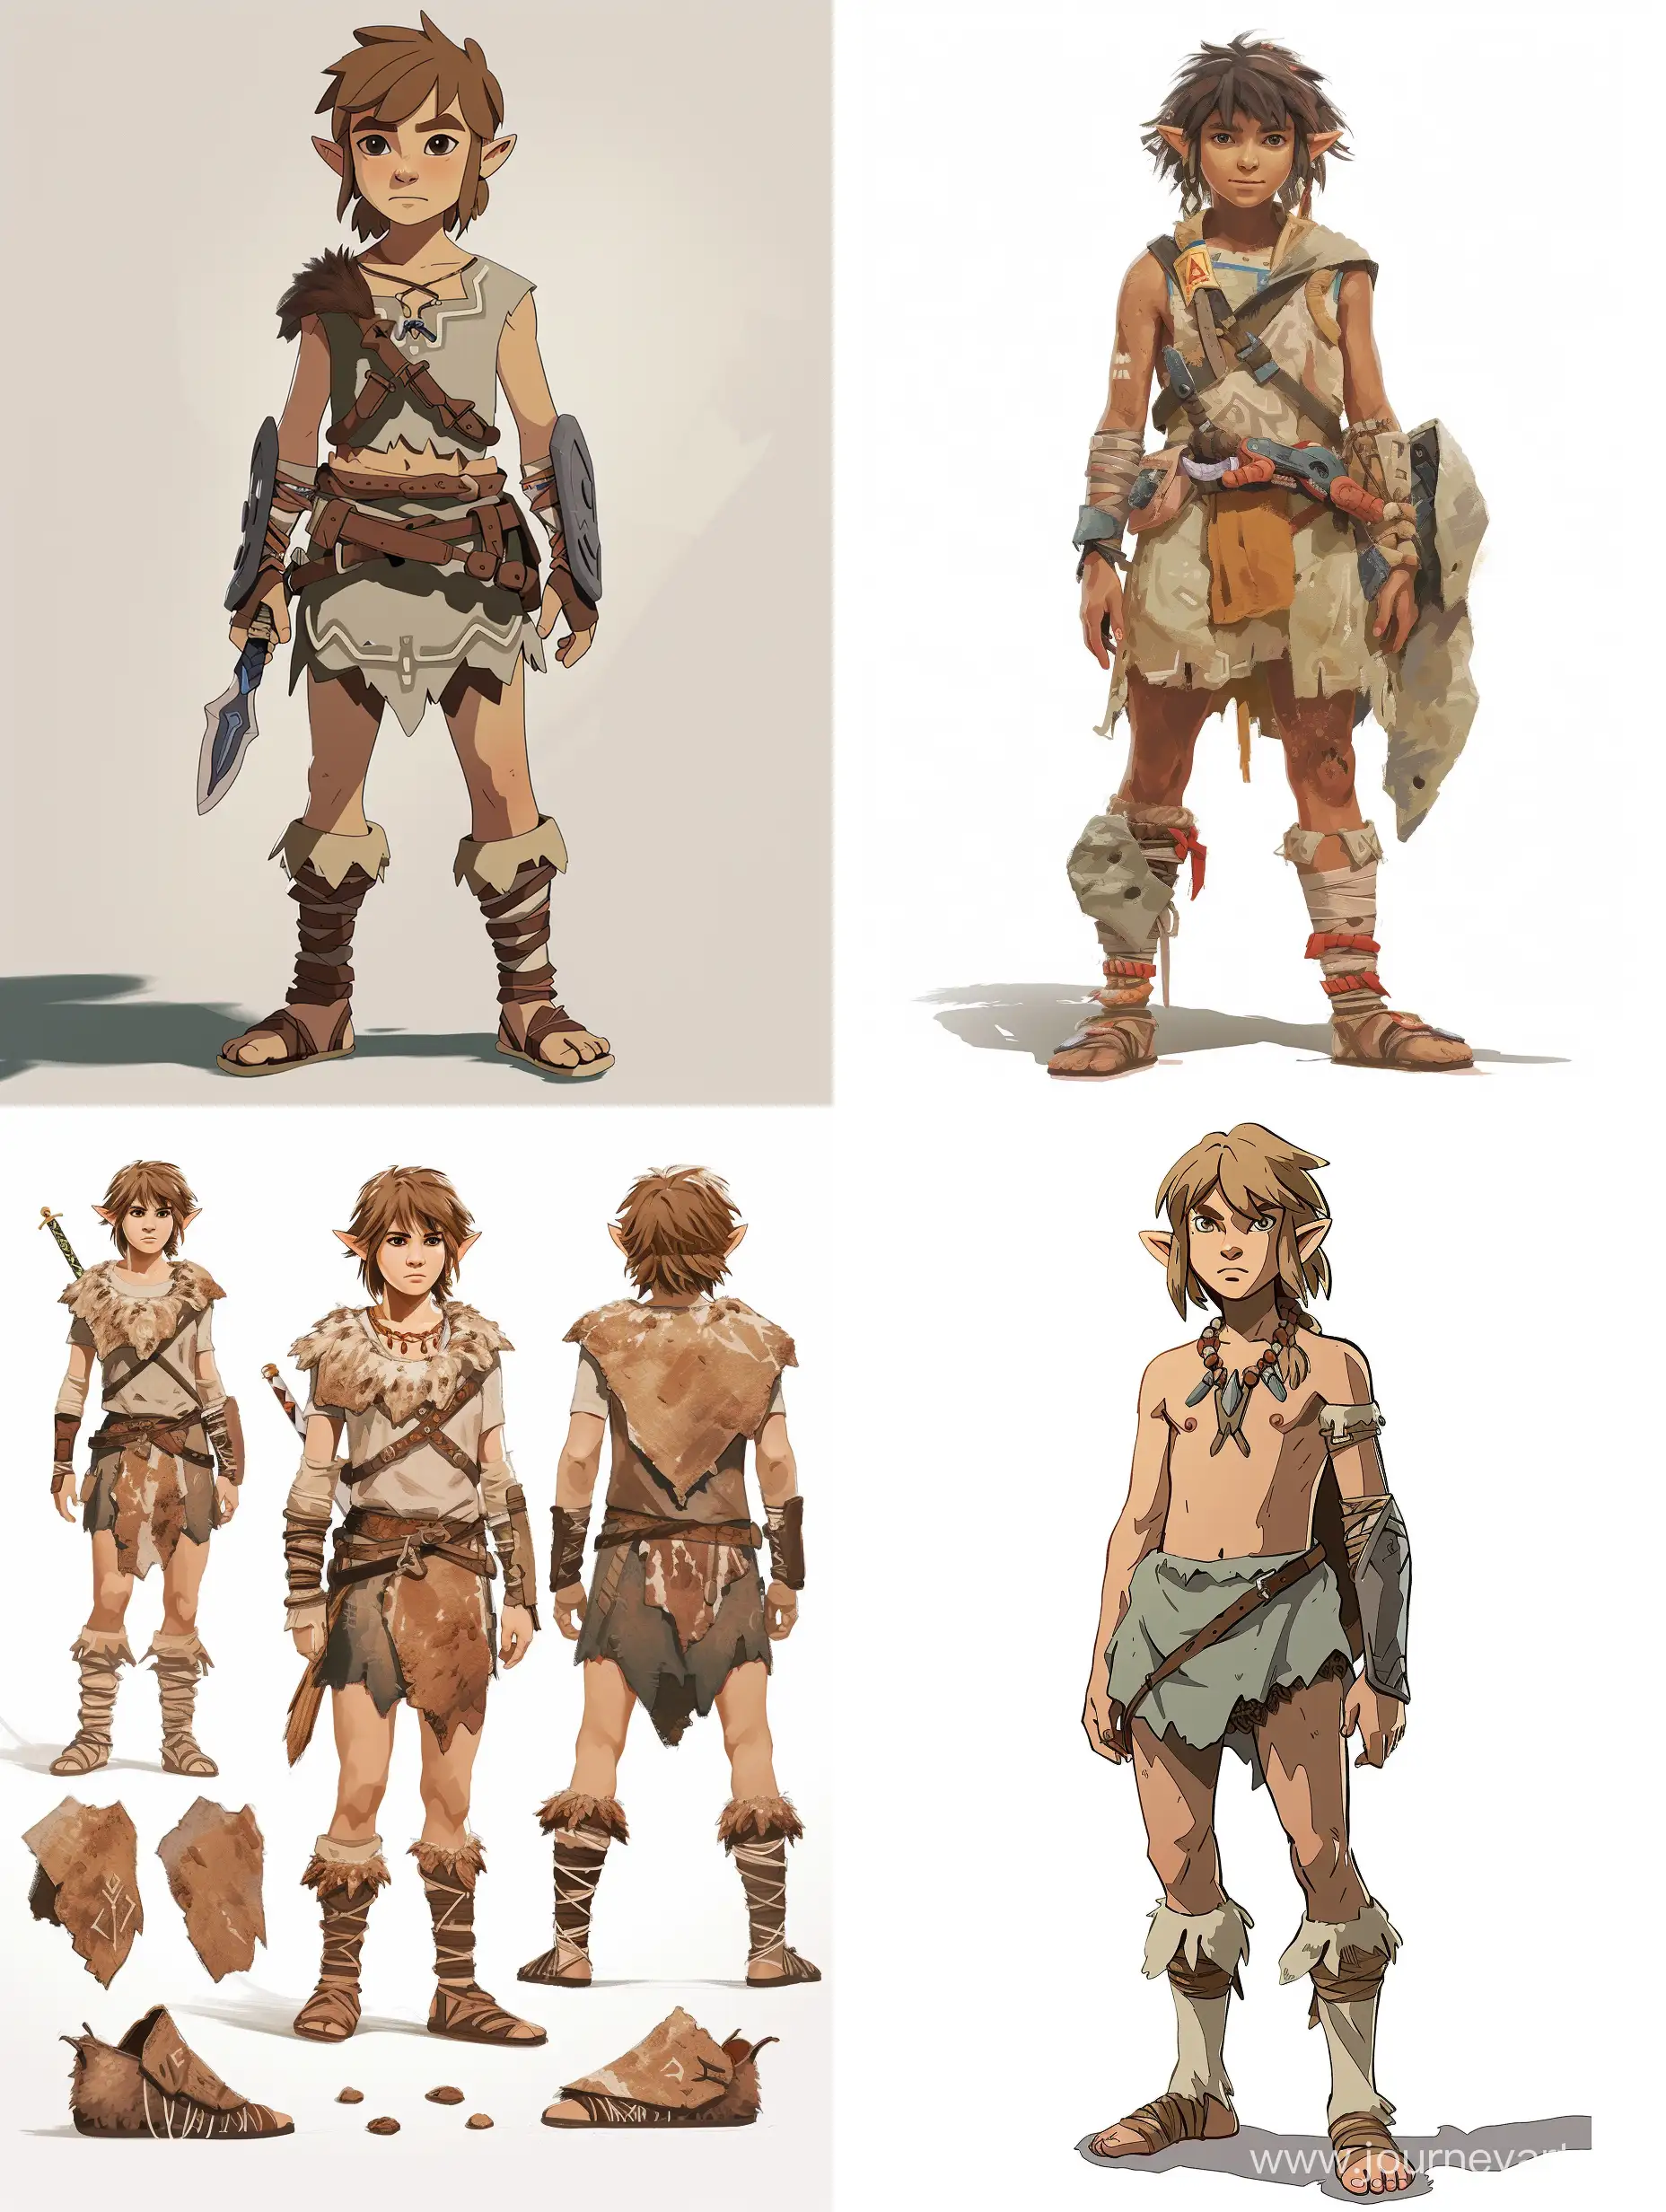 Stone-Age-Inspired-Game-Character-Concept-Art-Youthful-Adventurer-from-the-World-of-Zelda-Breath-of-the-Wild